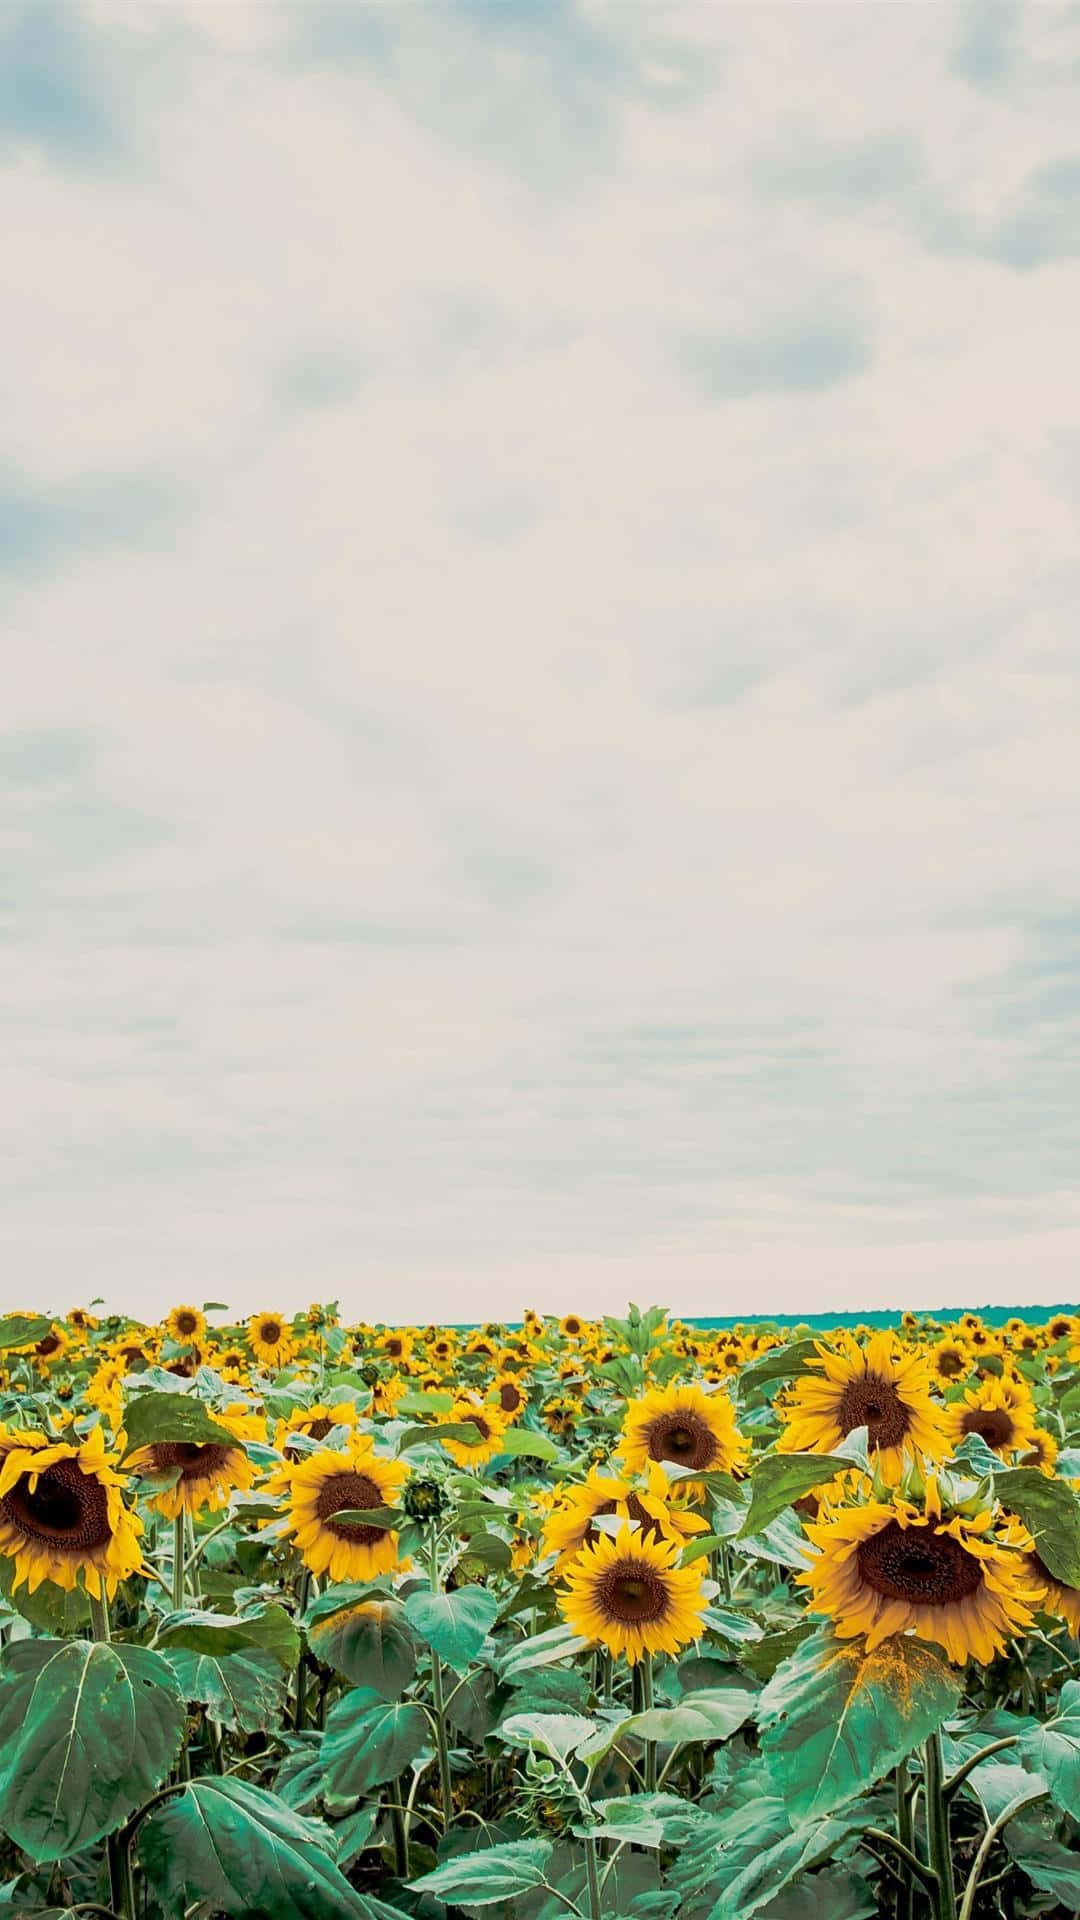 Download Brighten Your Day With This Sunshine Inspired Sunflower Aesthetic IPhone Wallpaper Wallpaper